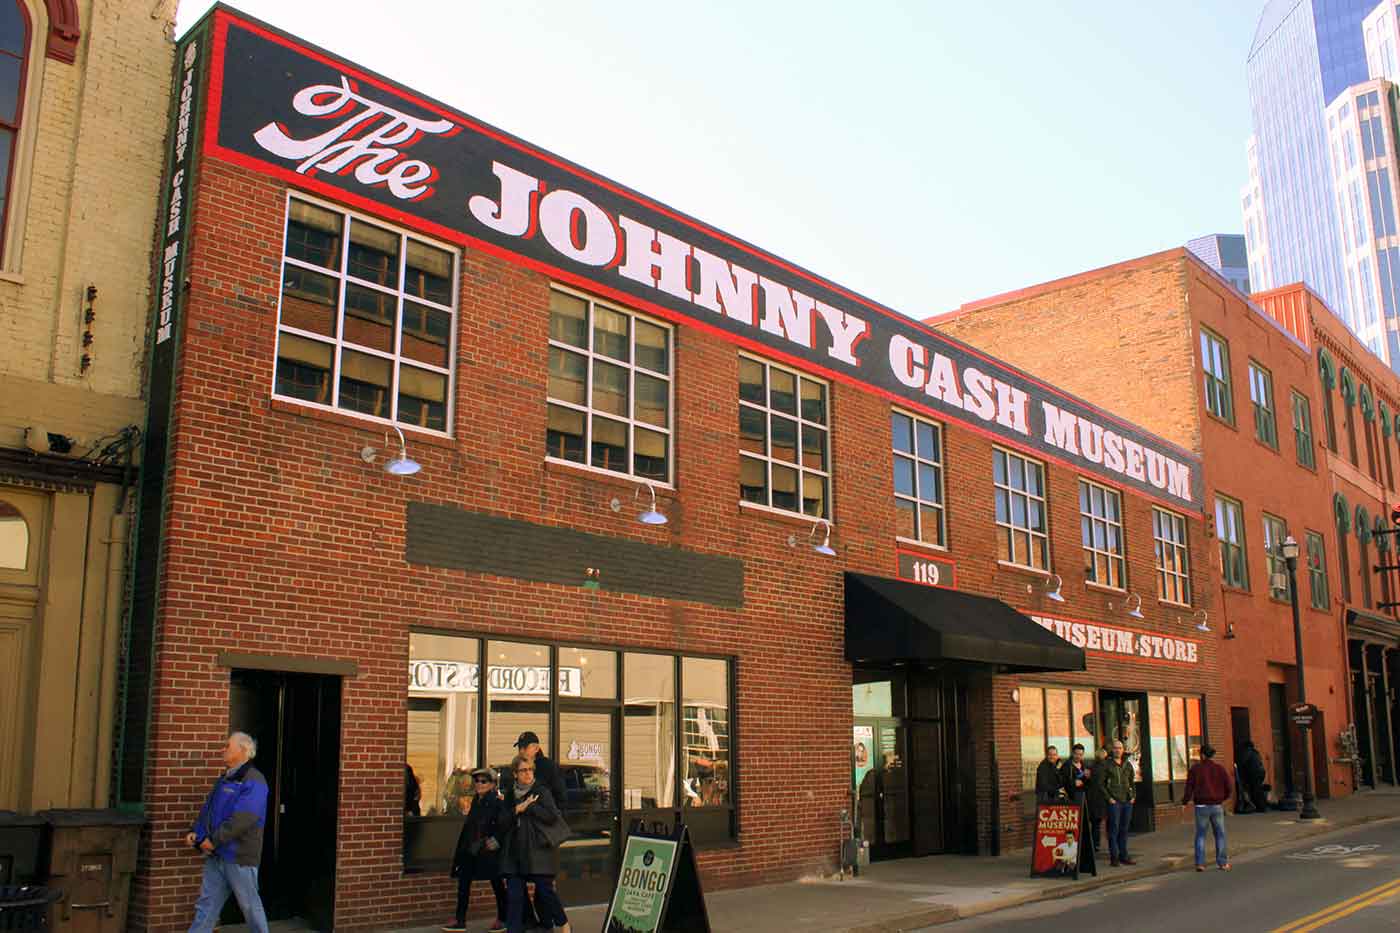 The Johnny Cash Museum